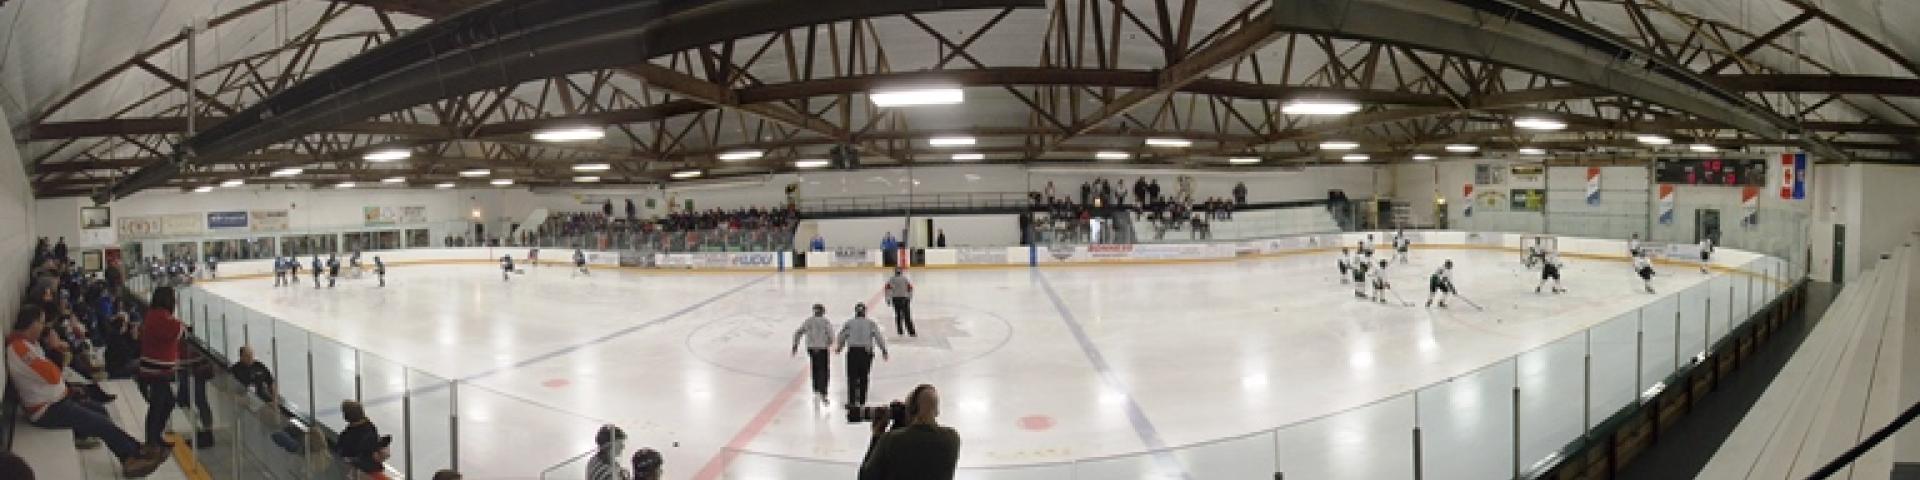 Interior panorama view of hockey rink with hockey game in progress.